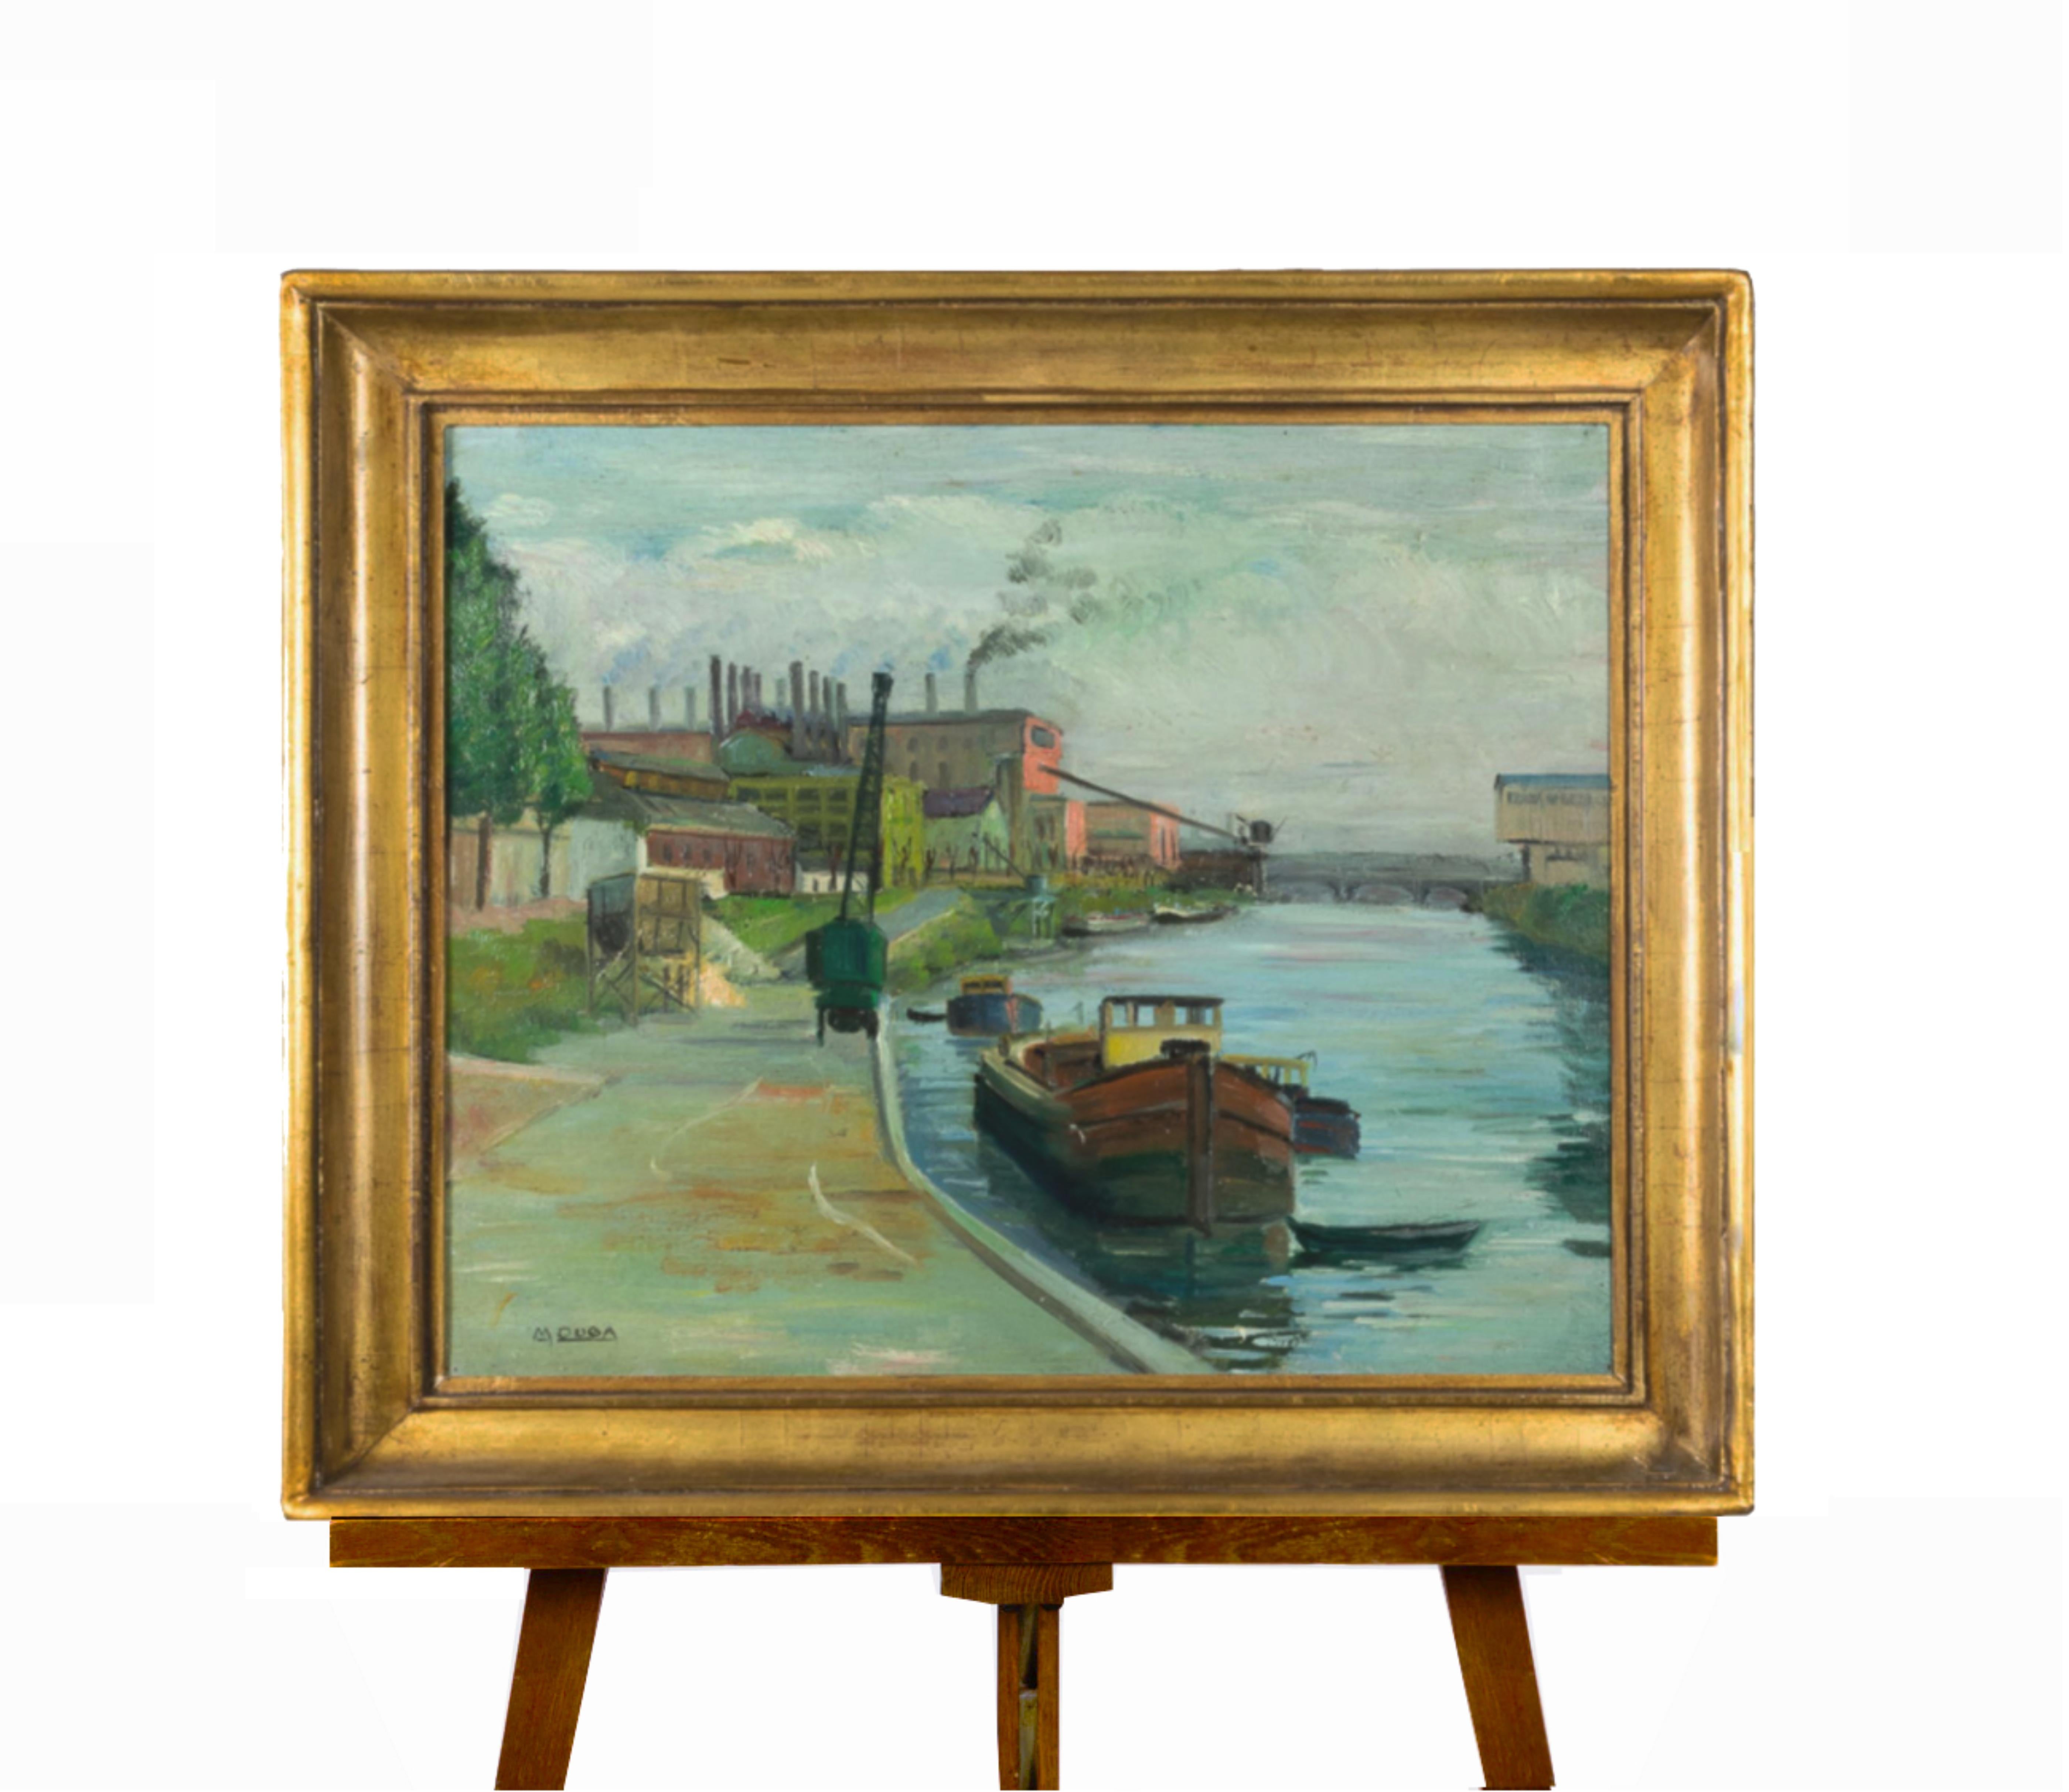 This lovely post-impressionist painting depicts a French riverboat gliding along a canal, with a factory and shipyard visible in the background. It is signed by the artist M Duba in the corner, as shown in the photos.

Frame: 62 x 73
Canvas: 50 x 61